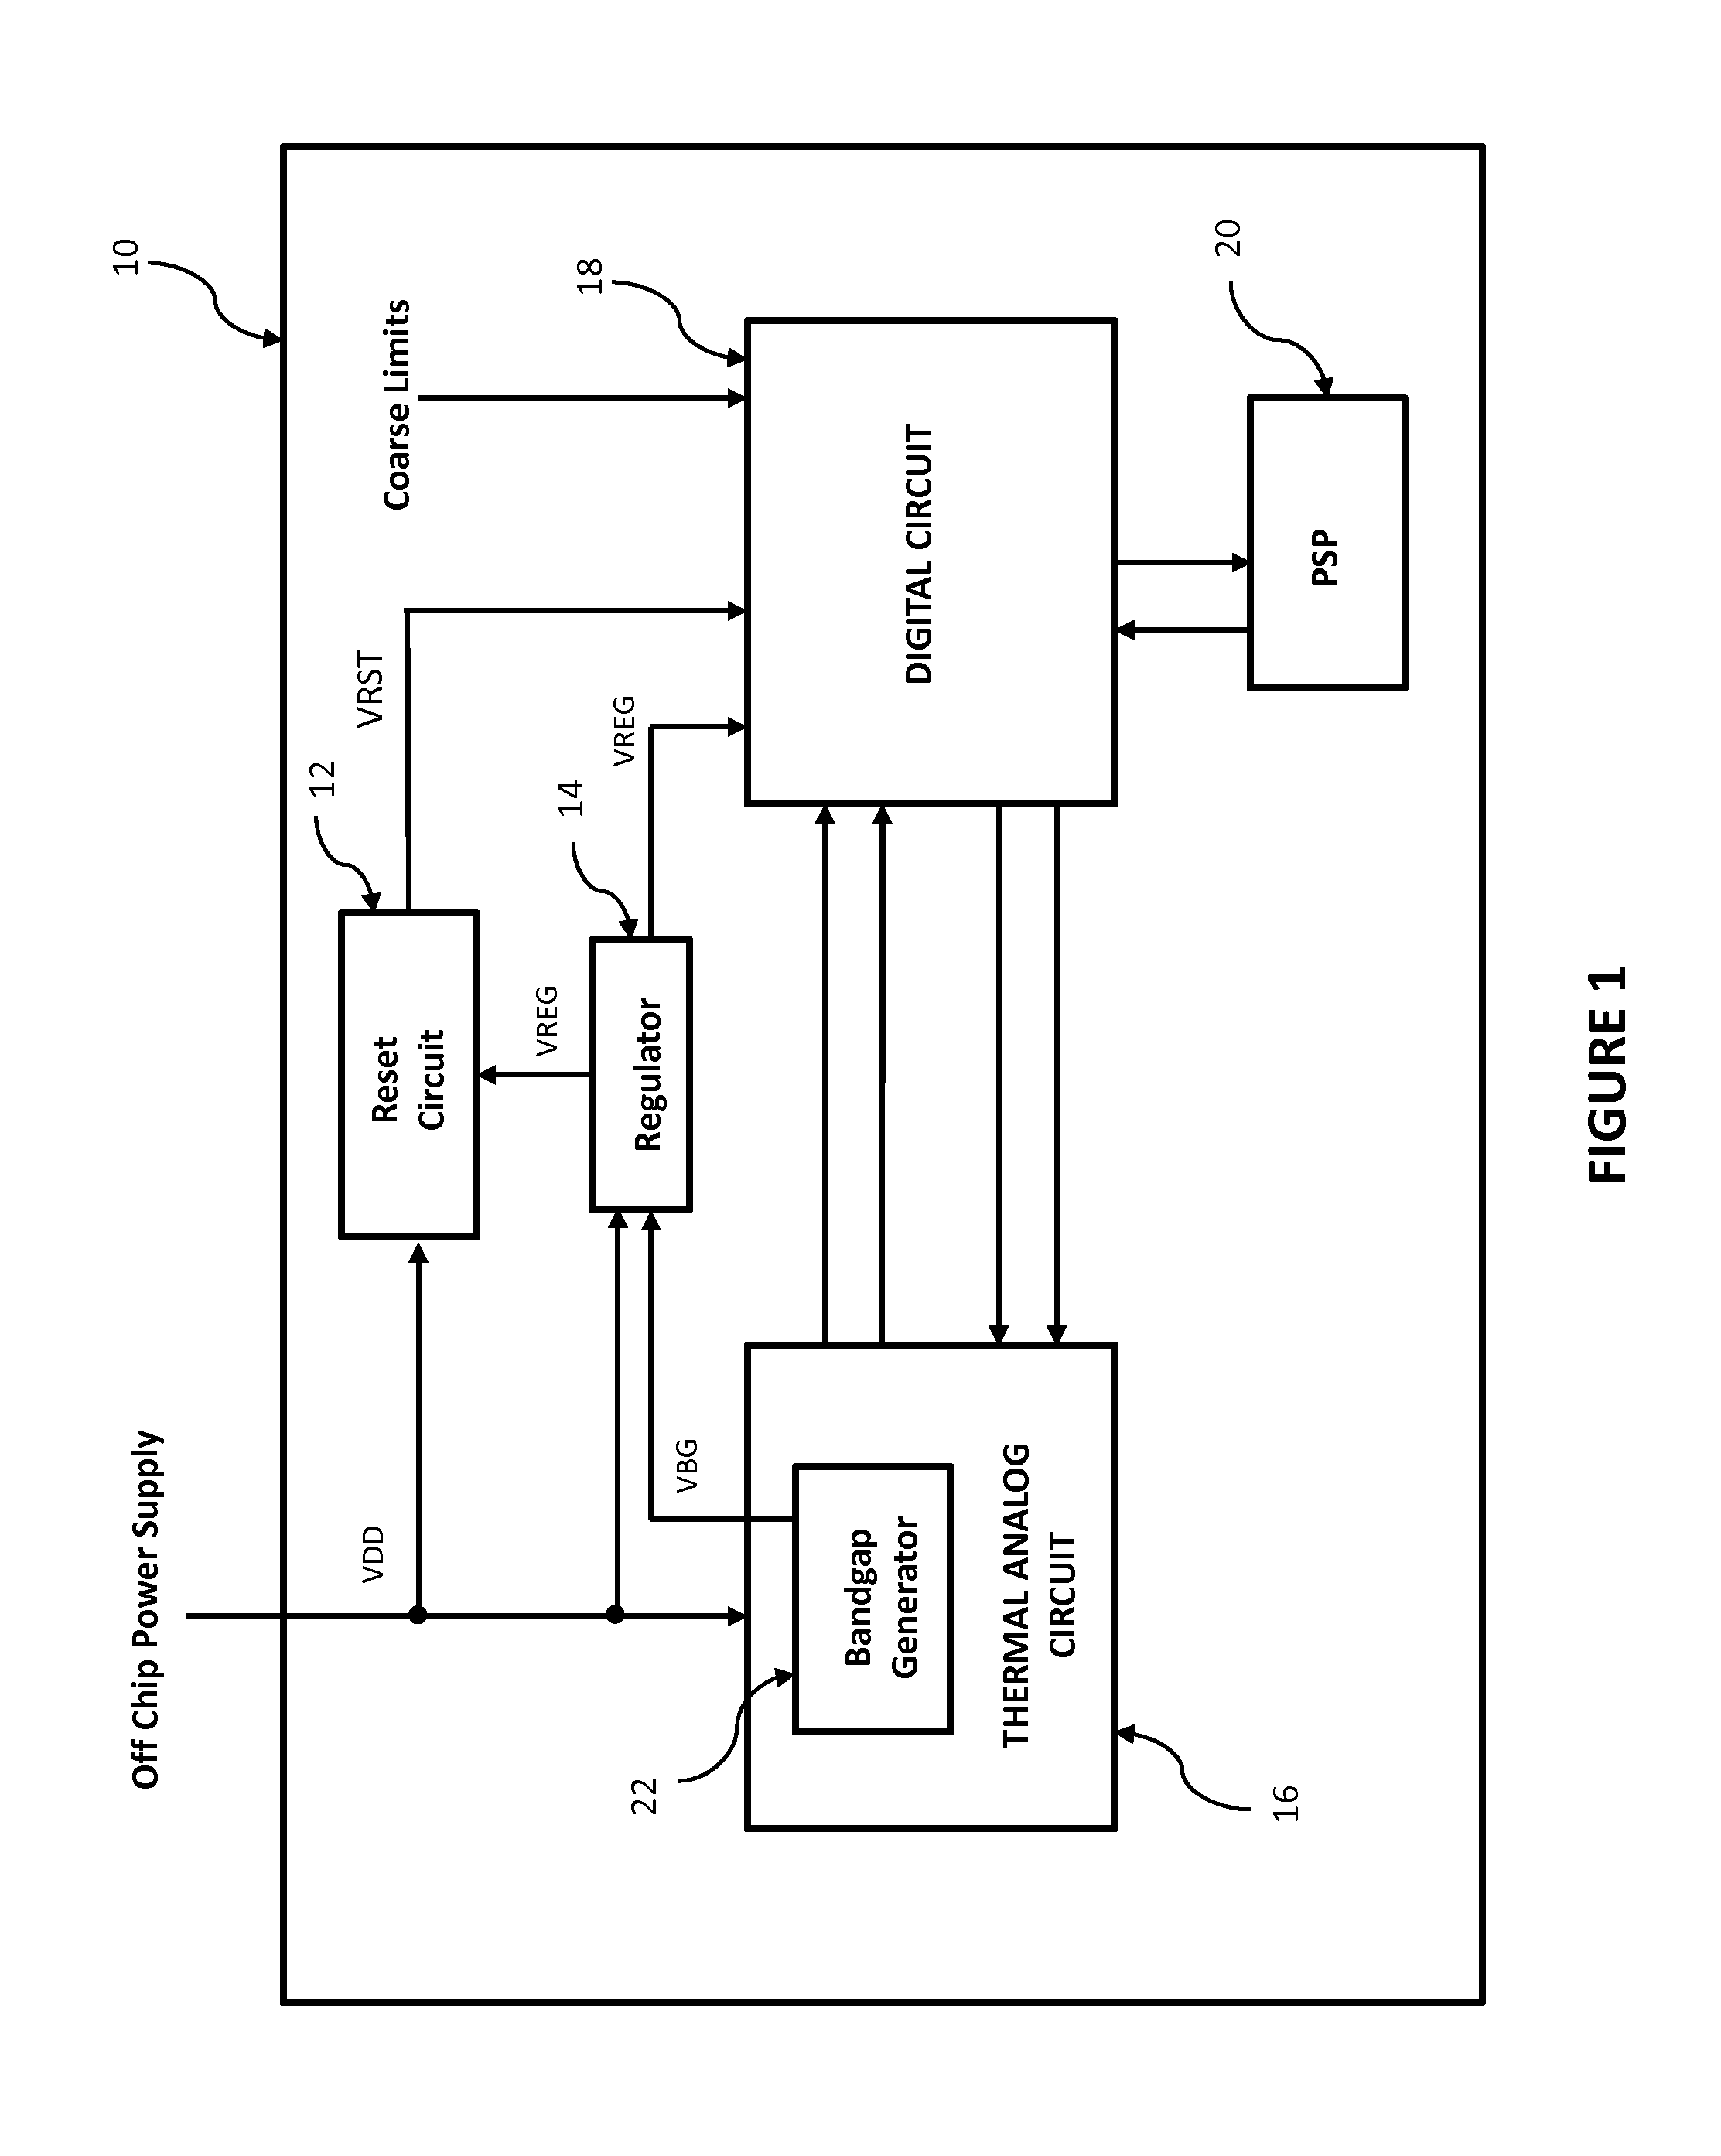 Method and apparatus for power-up detection for an electrical monitoring circuit